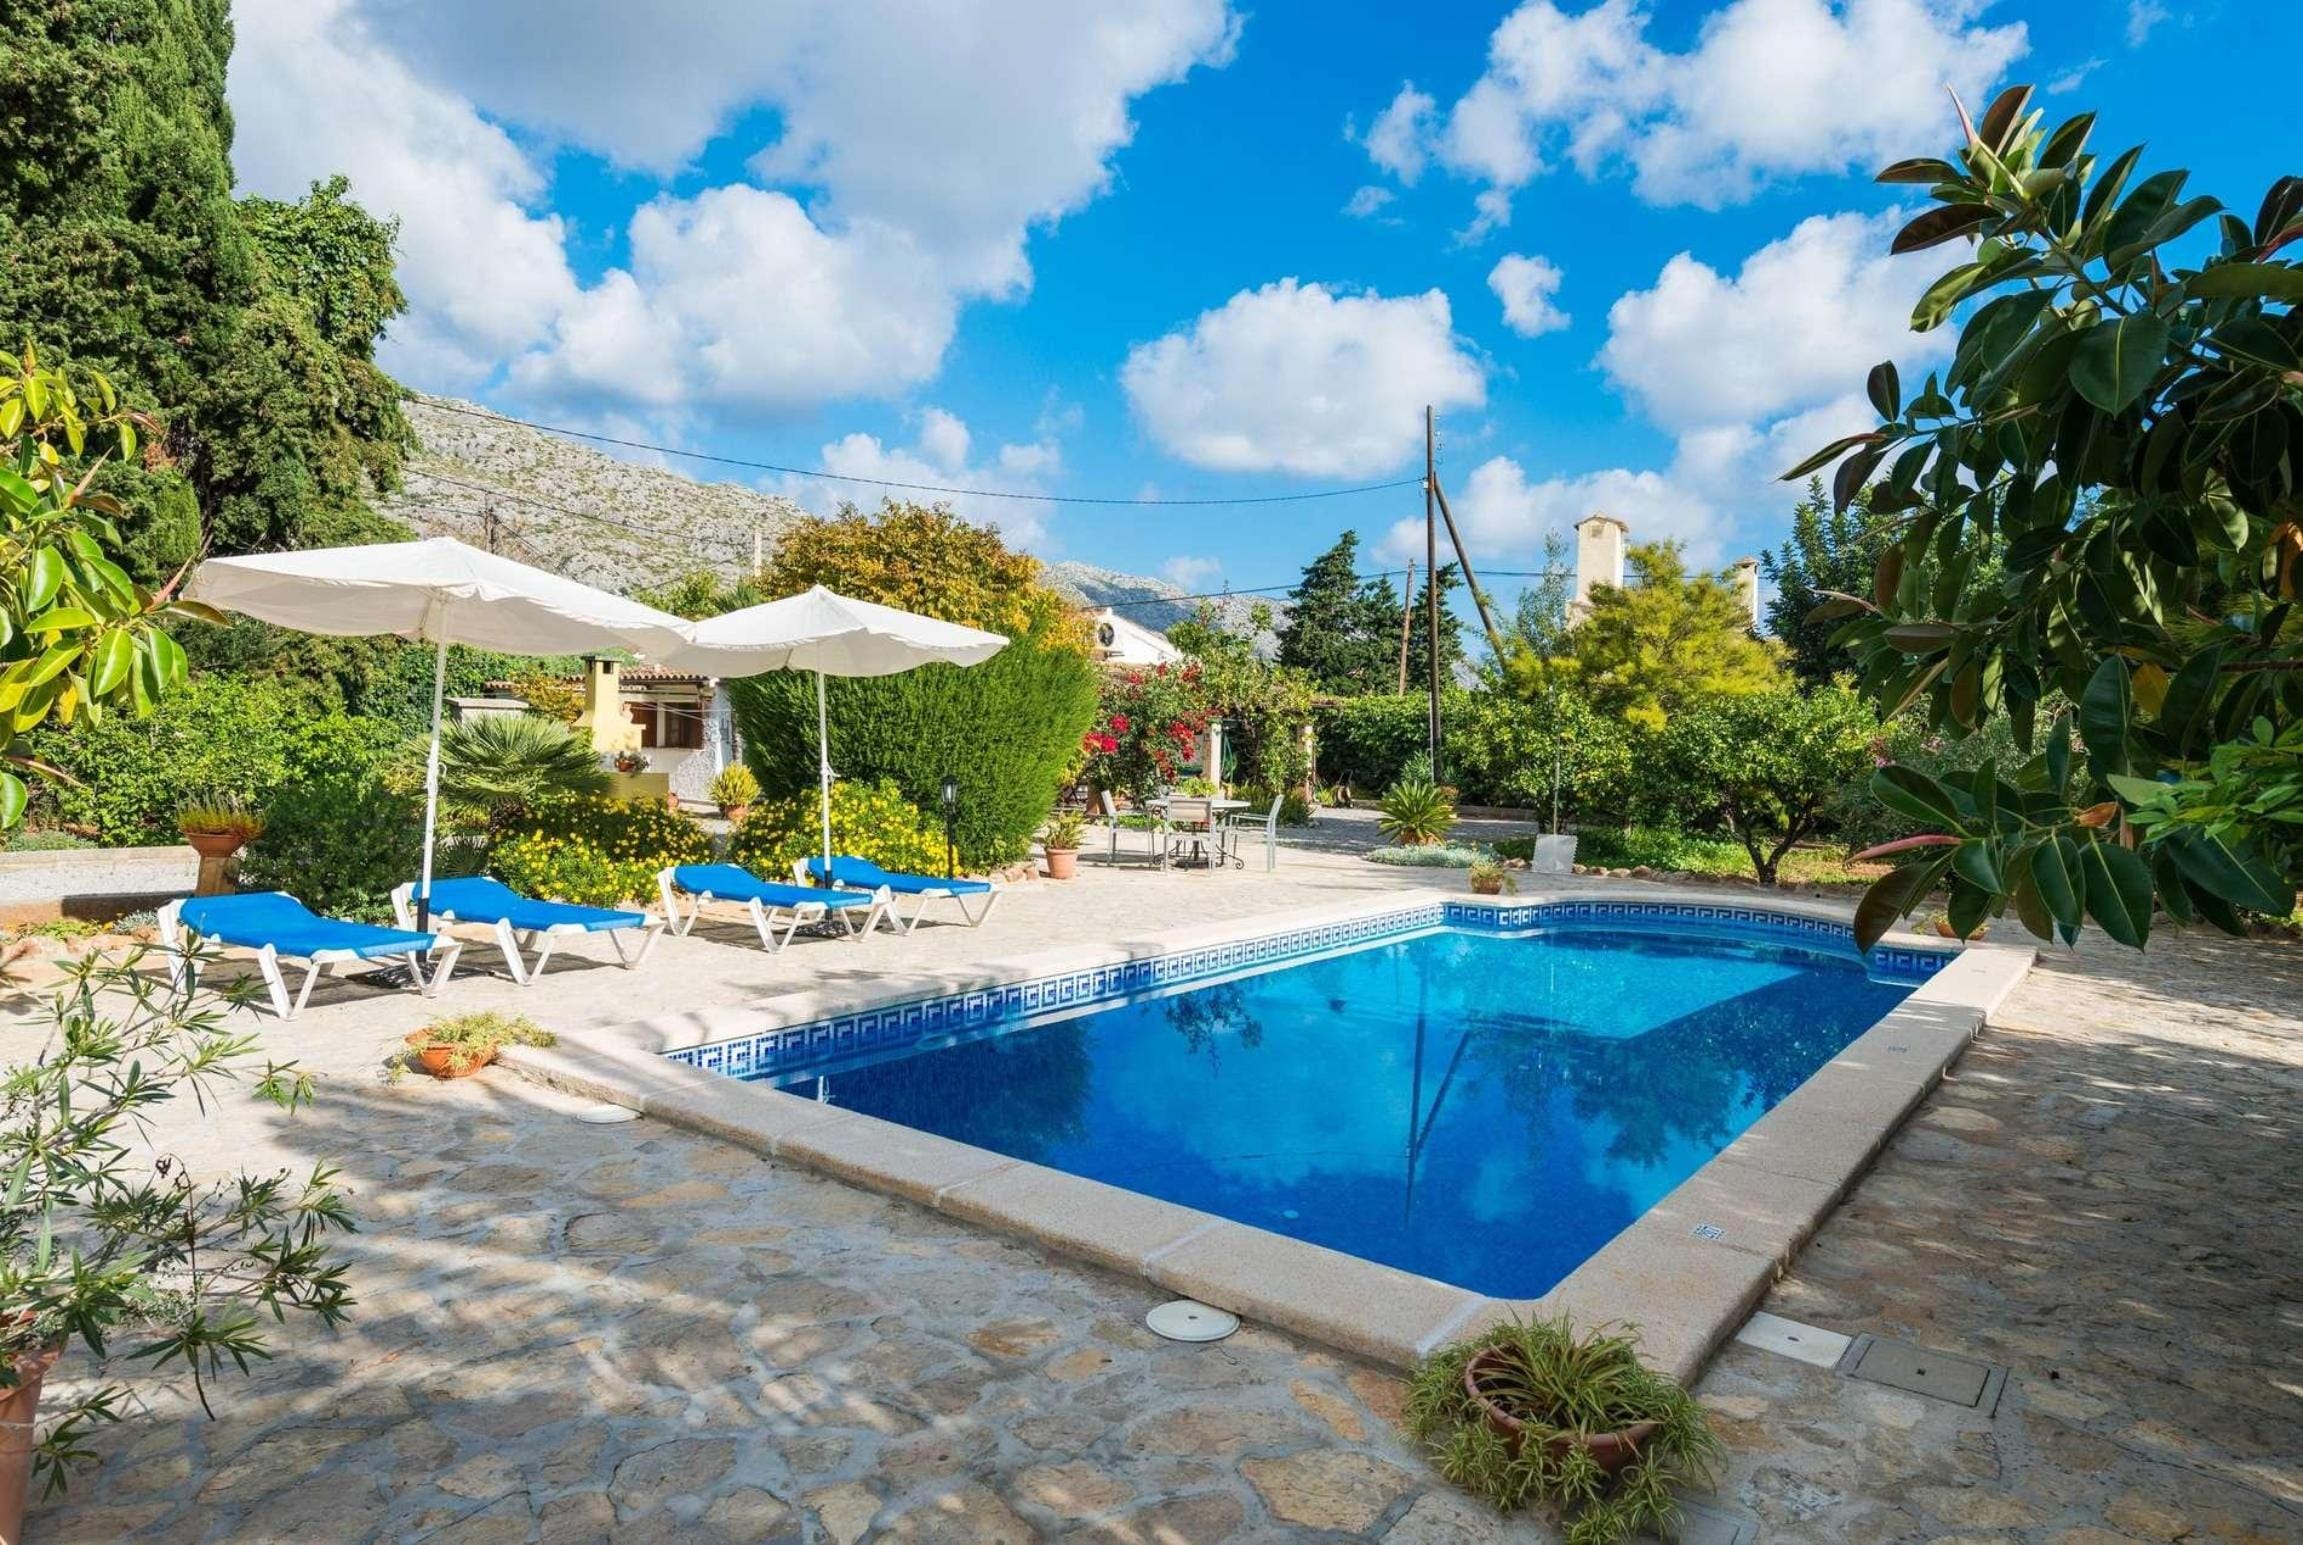 Property Image 1 - Lovely villa with pool close to Pollensa town.